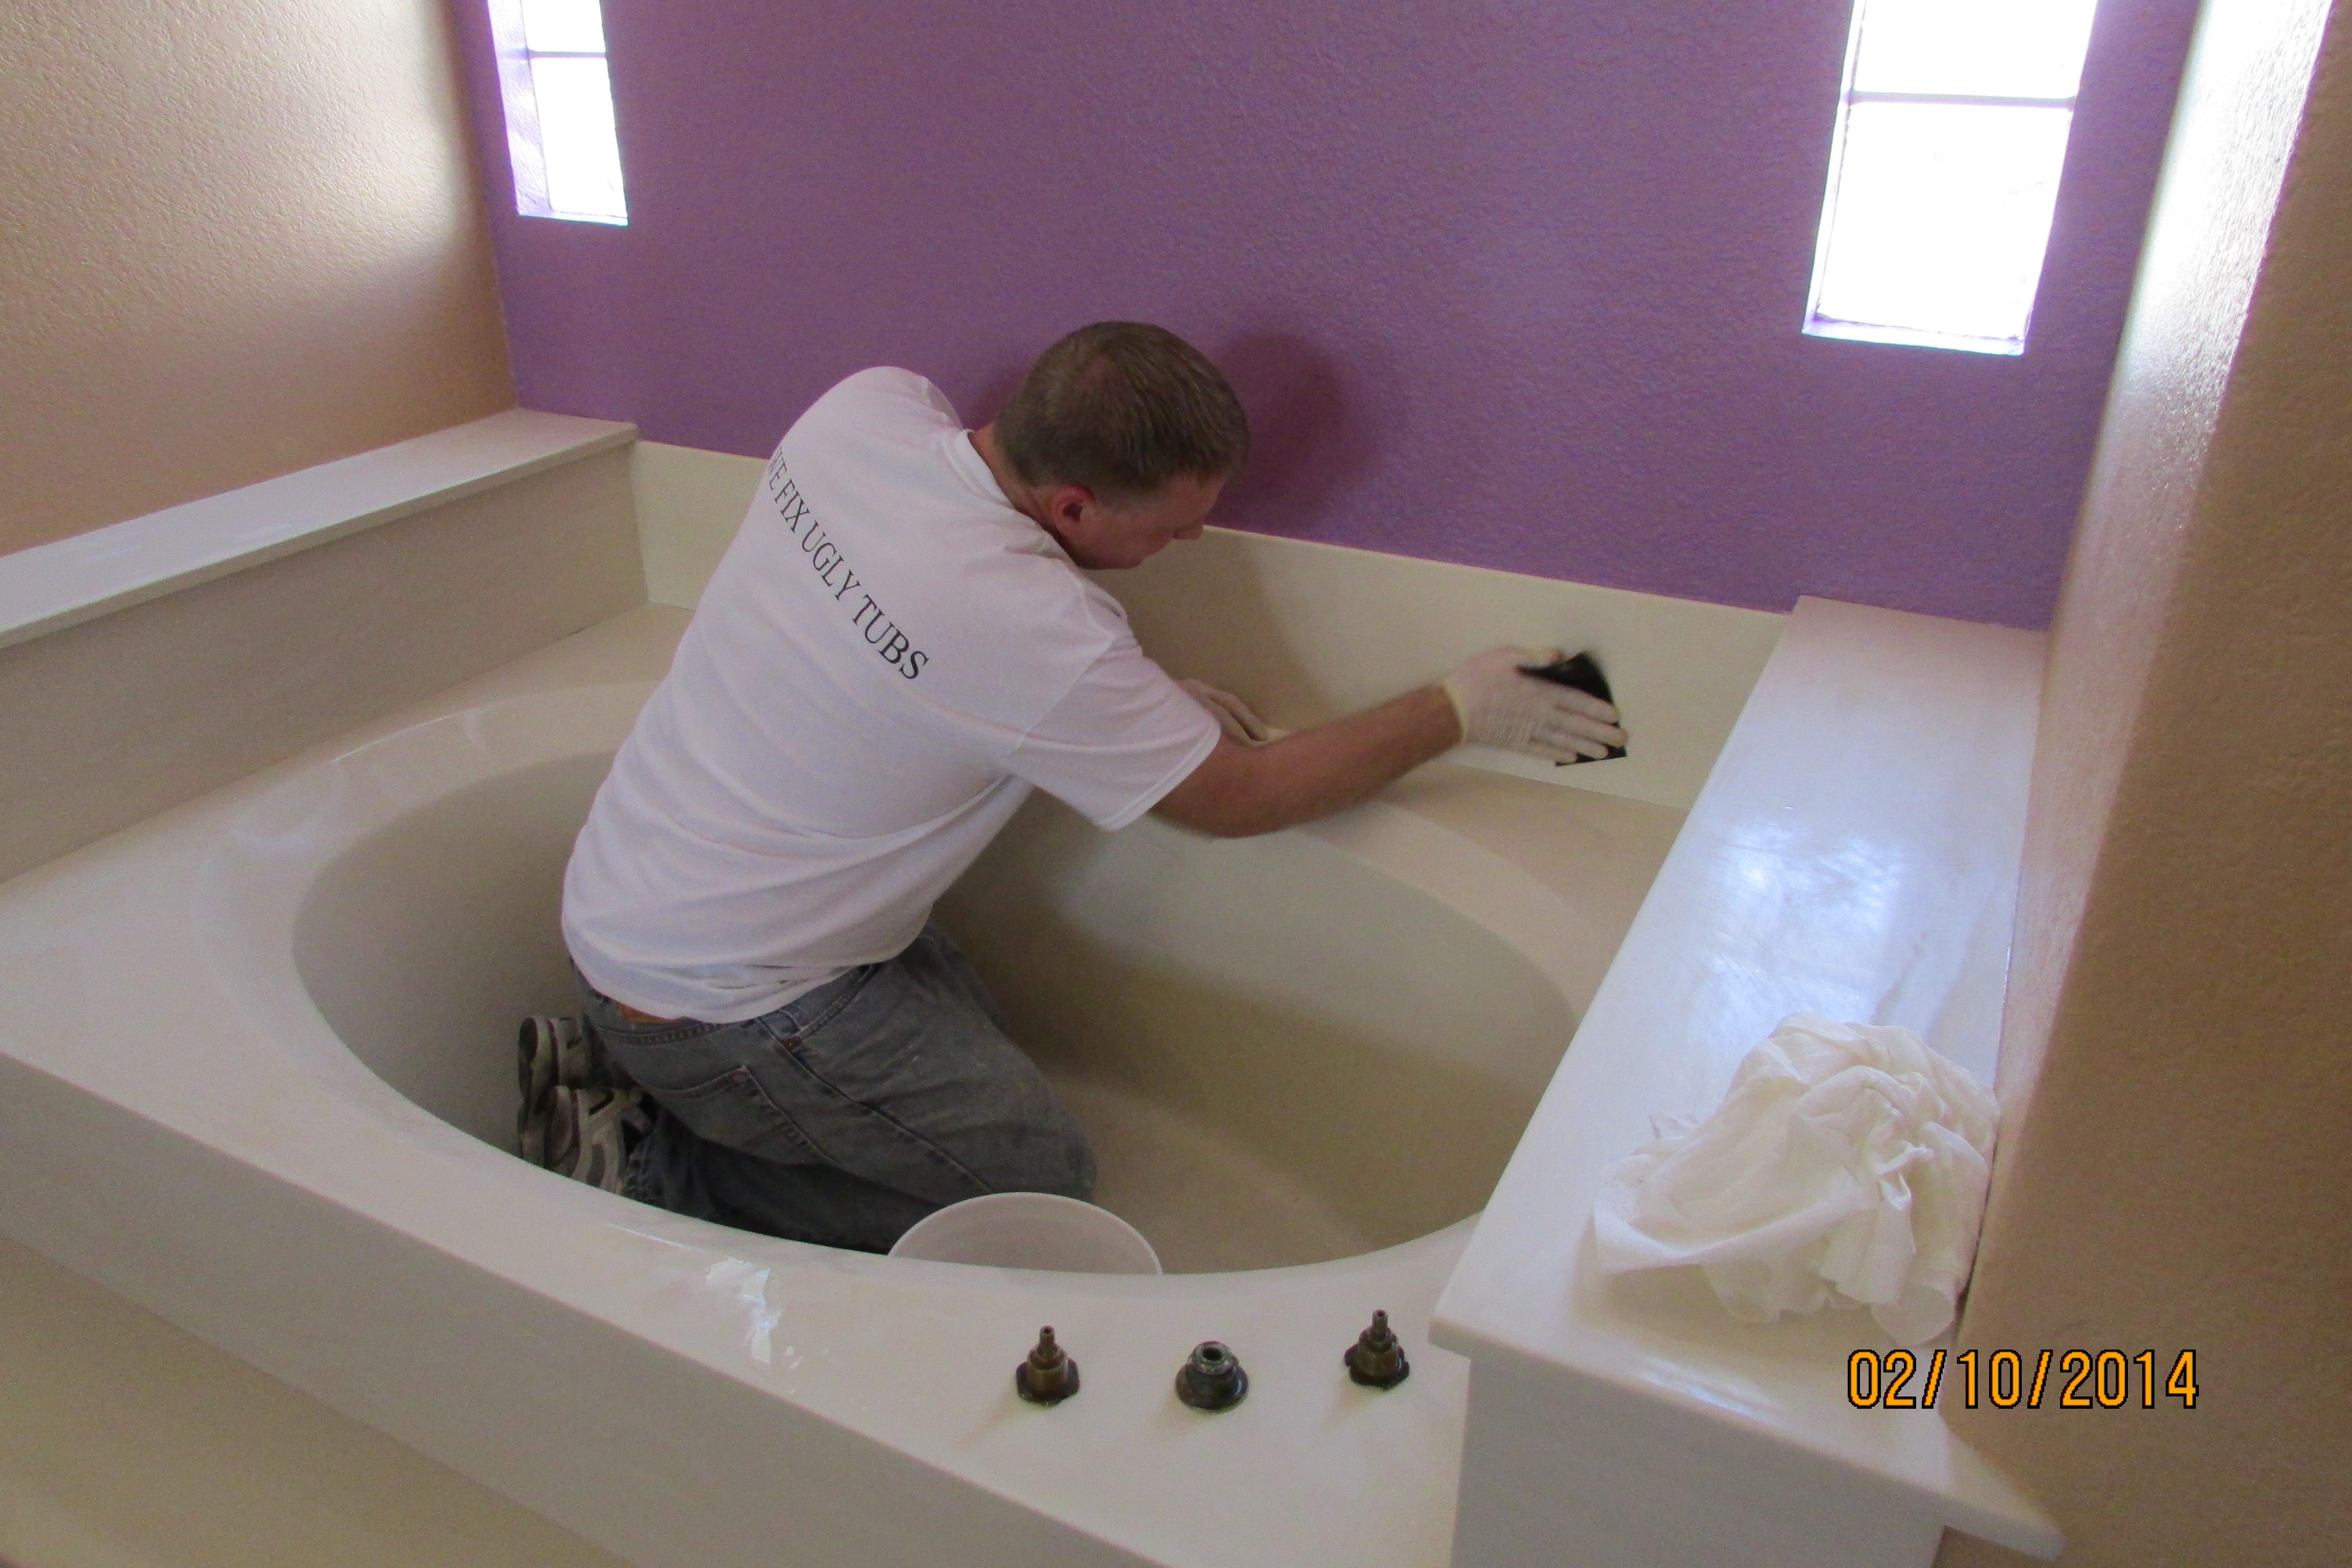 Bathtub Refinishing or Bathtub Liners? Which is the Right Choice?